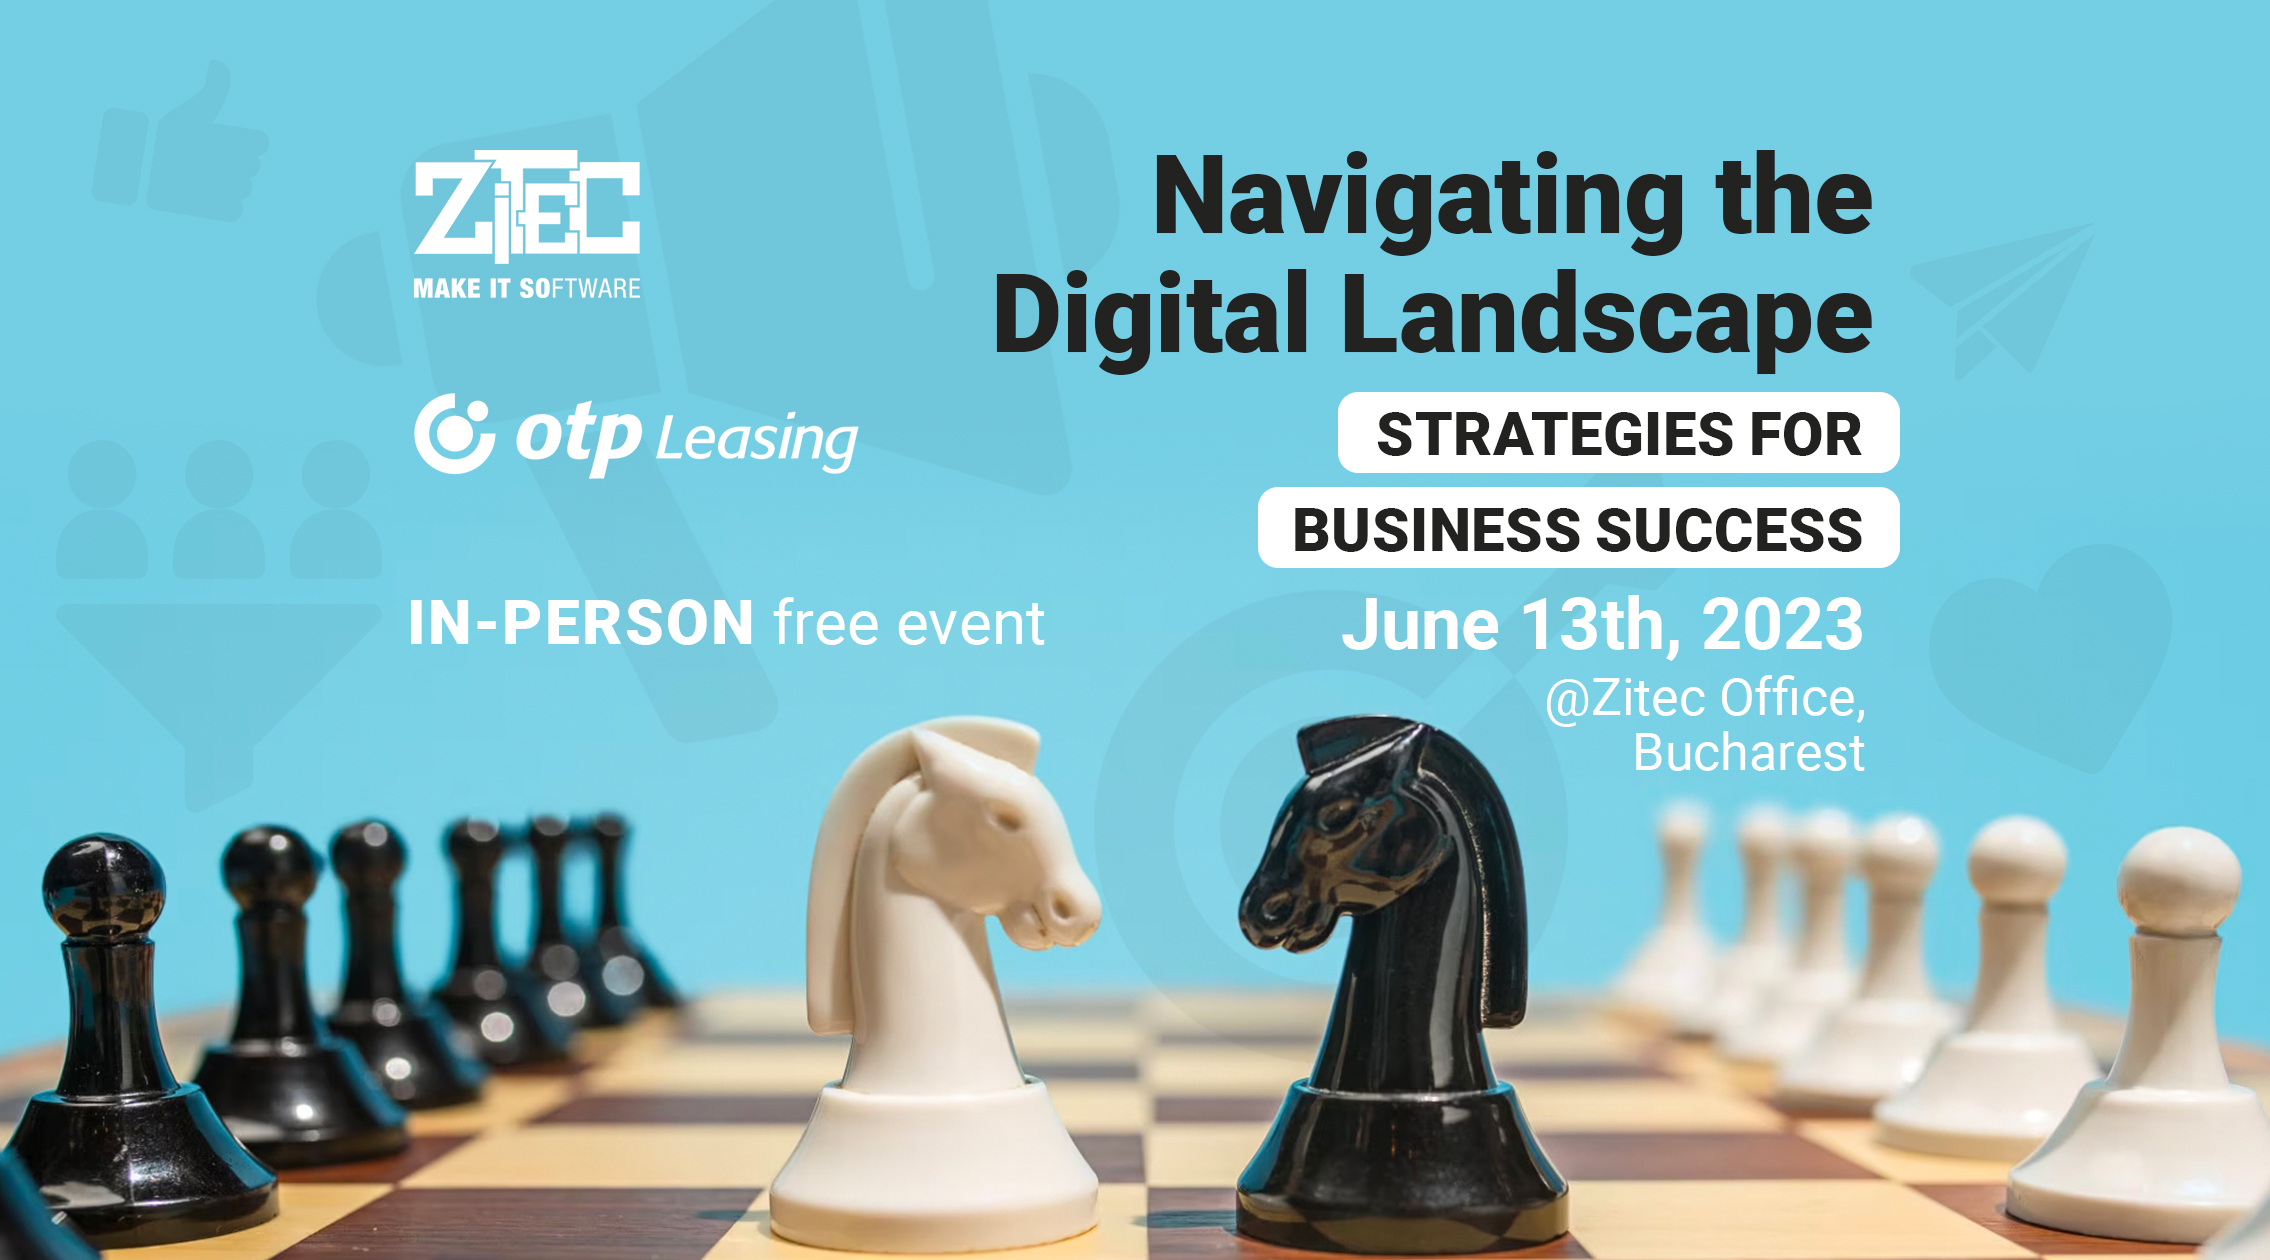 Navigating the Digital Landscape: An event that will place your business ahead of the game